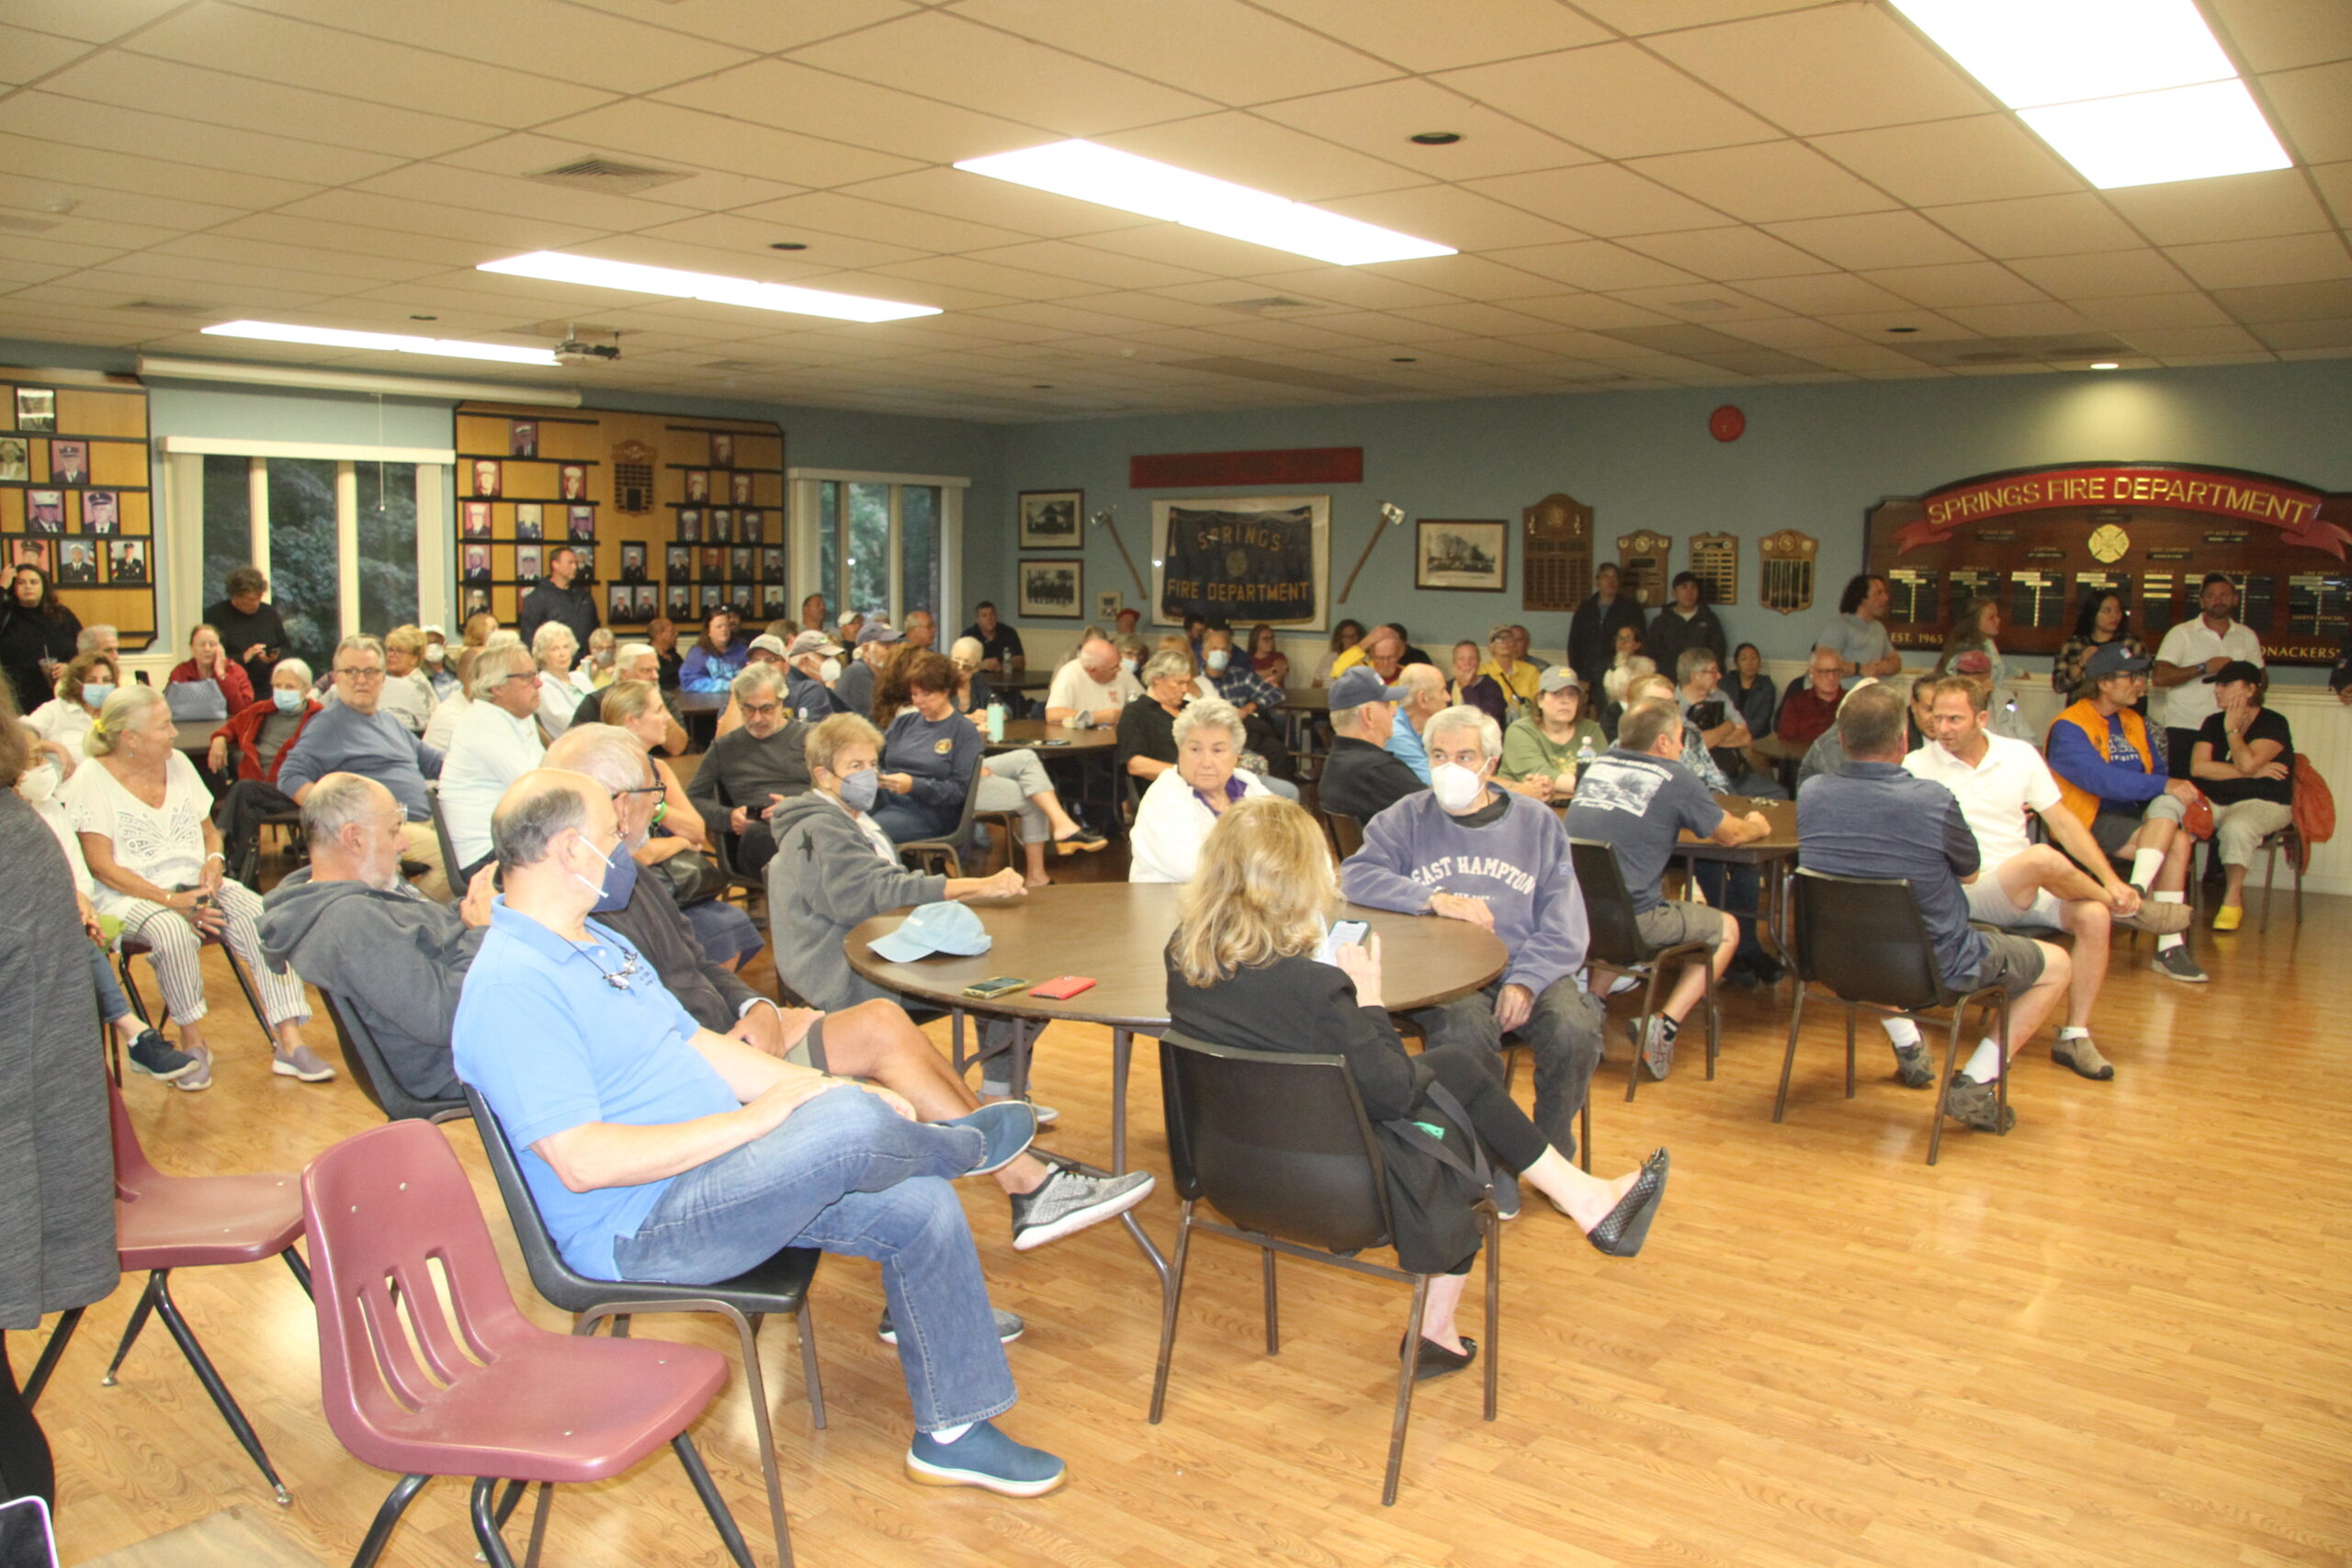 A large crowd of well over 100 residents of Springs turned out for the meeting at the firehouse, where the fire district and supporters urged them pressure town officials to sidestep the usual approval process and grant emergency authorization to the fire department to mount antennas on its tower.